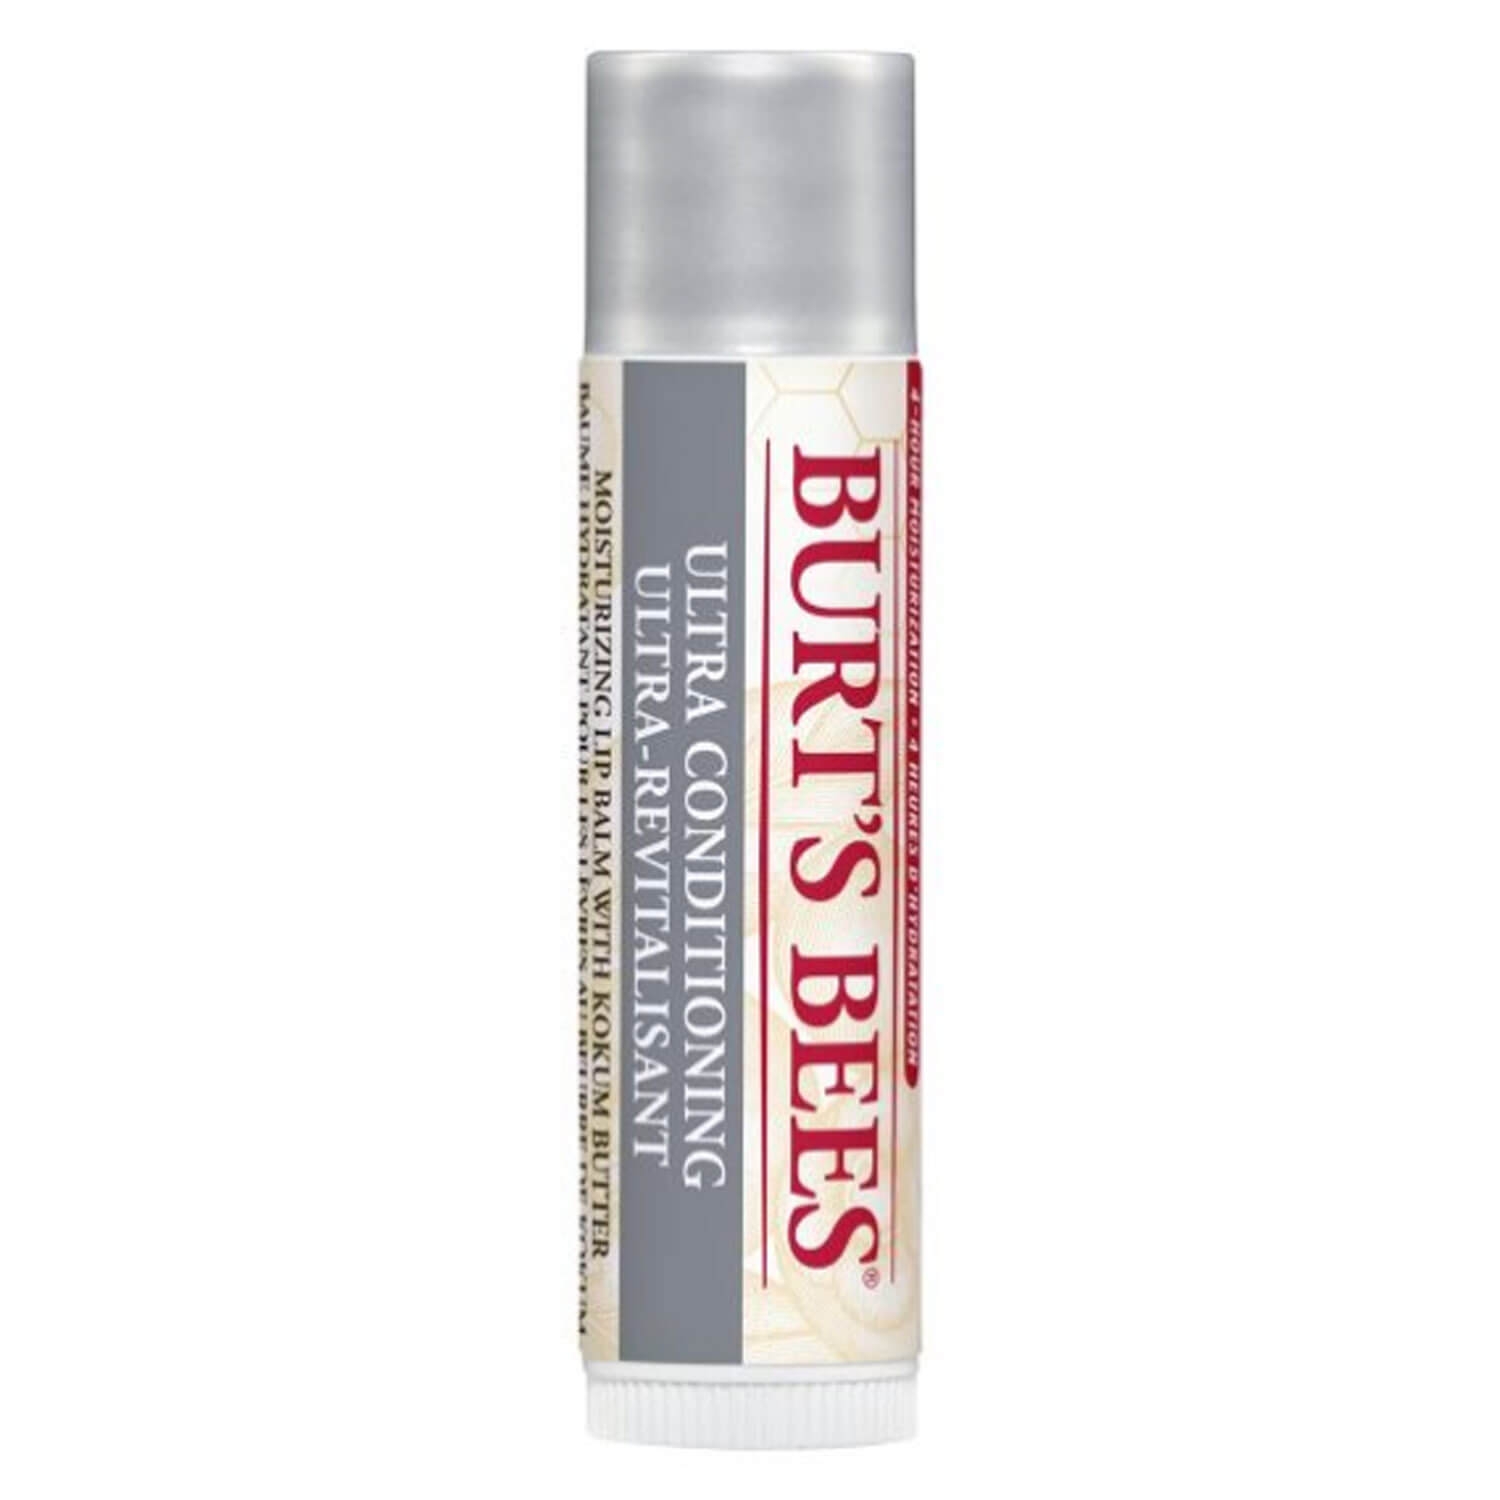 Product image from Burt's Bees - Lip Balm Ultra Conditioning Kokum Butter